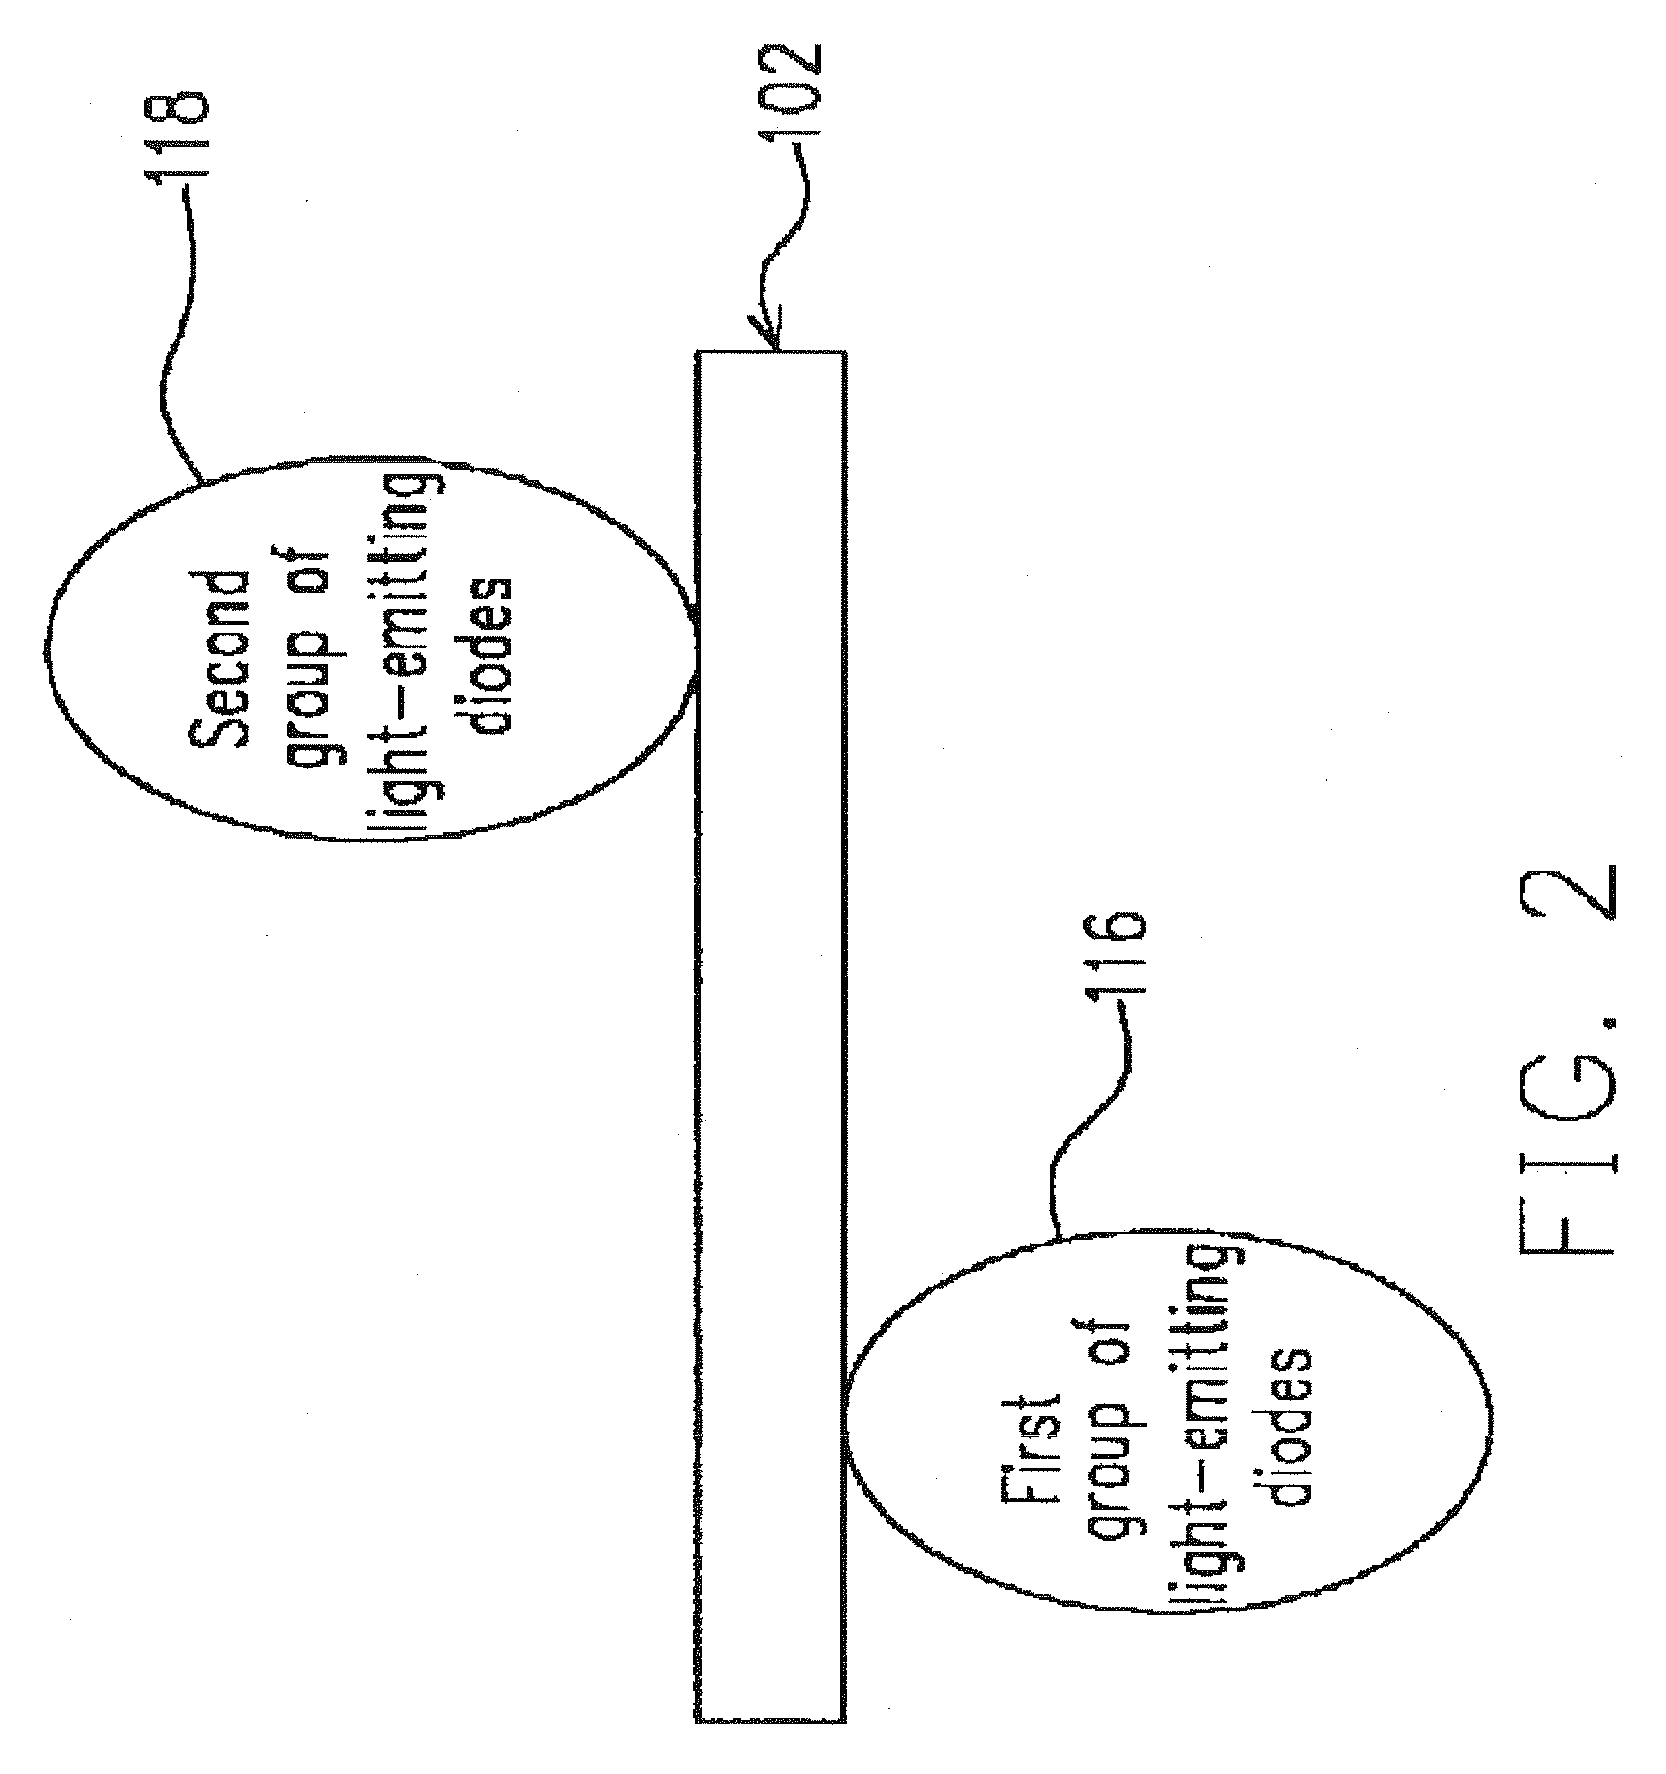 Method of operating a double-sided scanner